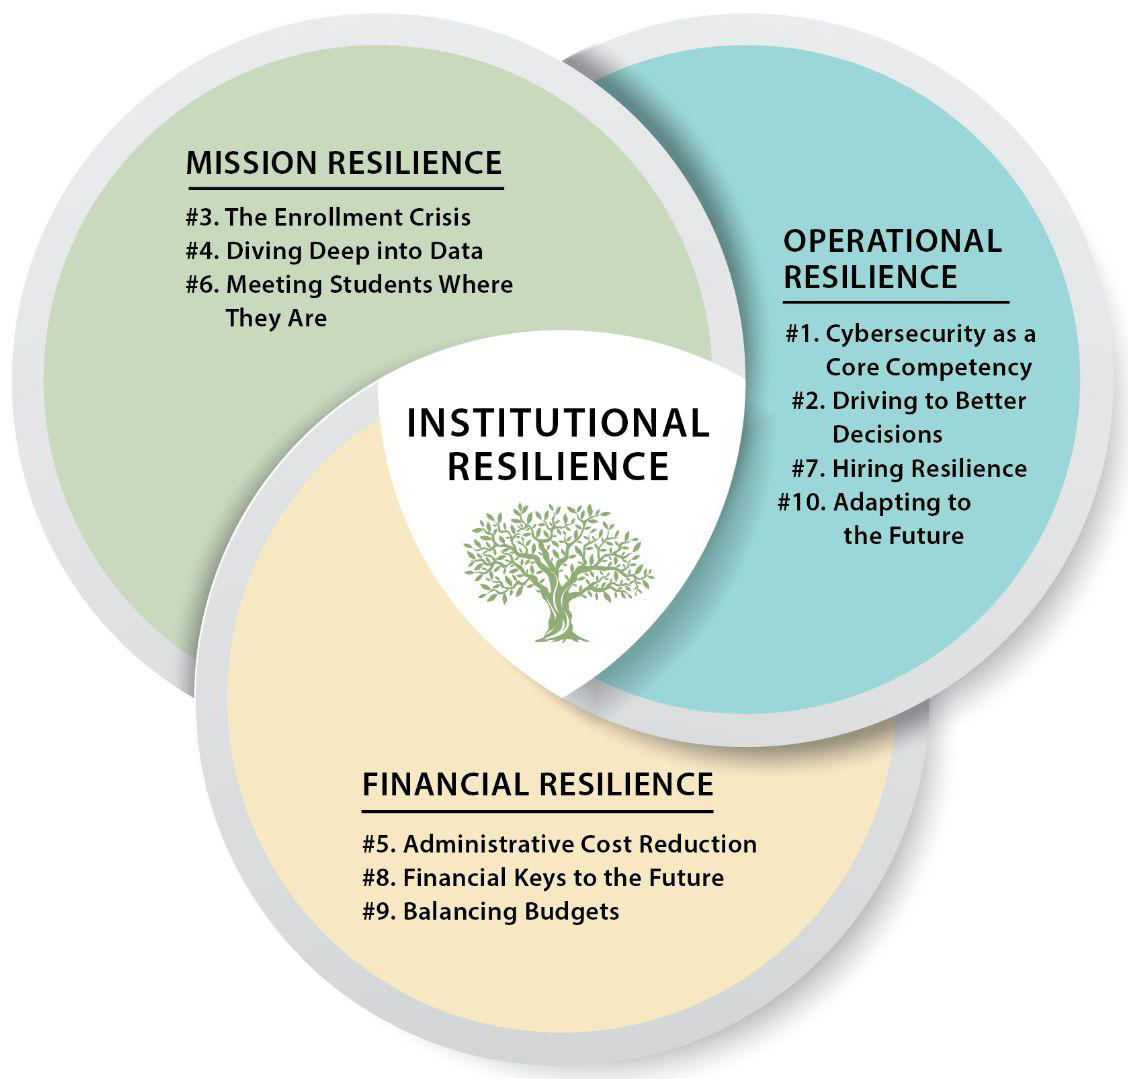 Venn Diagram. Center where all 3 circles overlap says 'Institutional Resilience'. The three circles are:   Mission Resilience | #3. The Enrollment Crisis: Harnessing data to empower decision-makers; #4. Diving Deep into Data: Leveraging analytics for actionable insights to improve learning and student success; #6. Meeting Students Where They Are: Providing universal access to institutional services.  Operational Resilience | #1. Cybersecurity as a Core Competency: Balancing cost and risk; #2. Driving to Better Decisions: Improving data quality and governance; #7. Hiring Resilience: Recruiting and retaining IT talent under adverse circumstances; #10. Adapting to the Future: Cultivating institutional agility. Financial Resilience | #5. Administrative Cost Reduction: Streamlining processes, data, and technologies; #8. Financial Keys to the Future: Using technology and data to help make tough choices; #9. Balancing Budgets: Taking control of IT cost and vendor management.